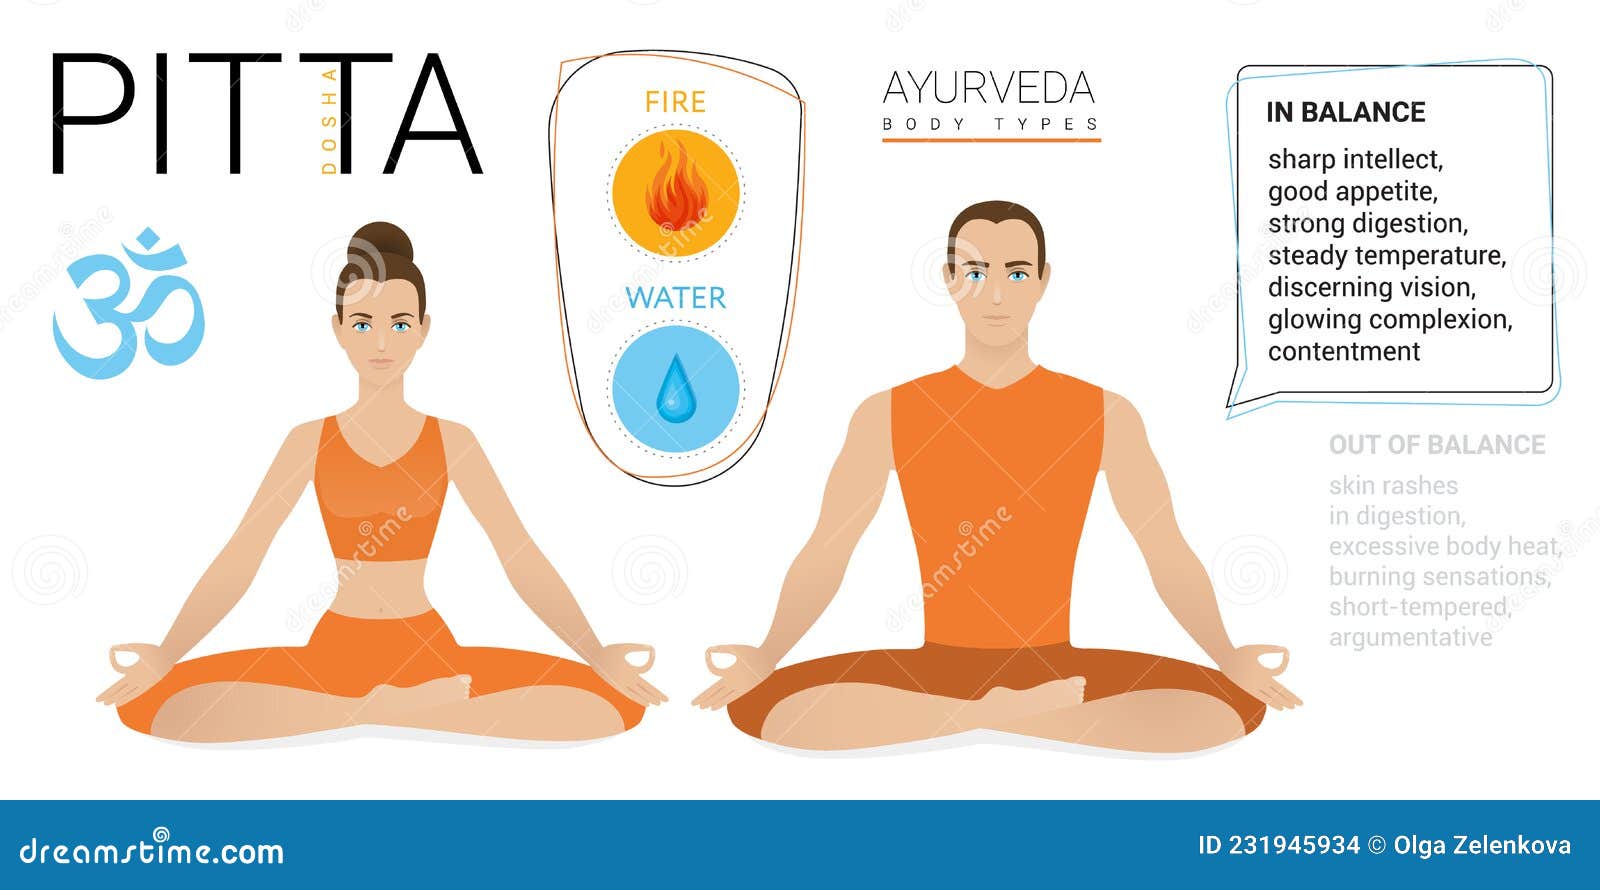 Ayurveda Suggests Yogas For Your Body Type - News18